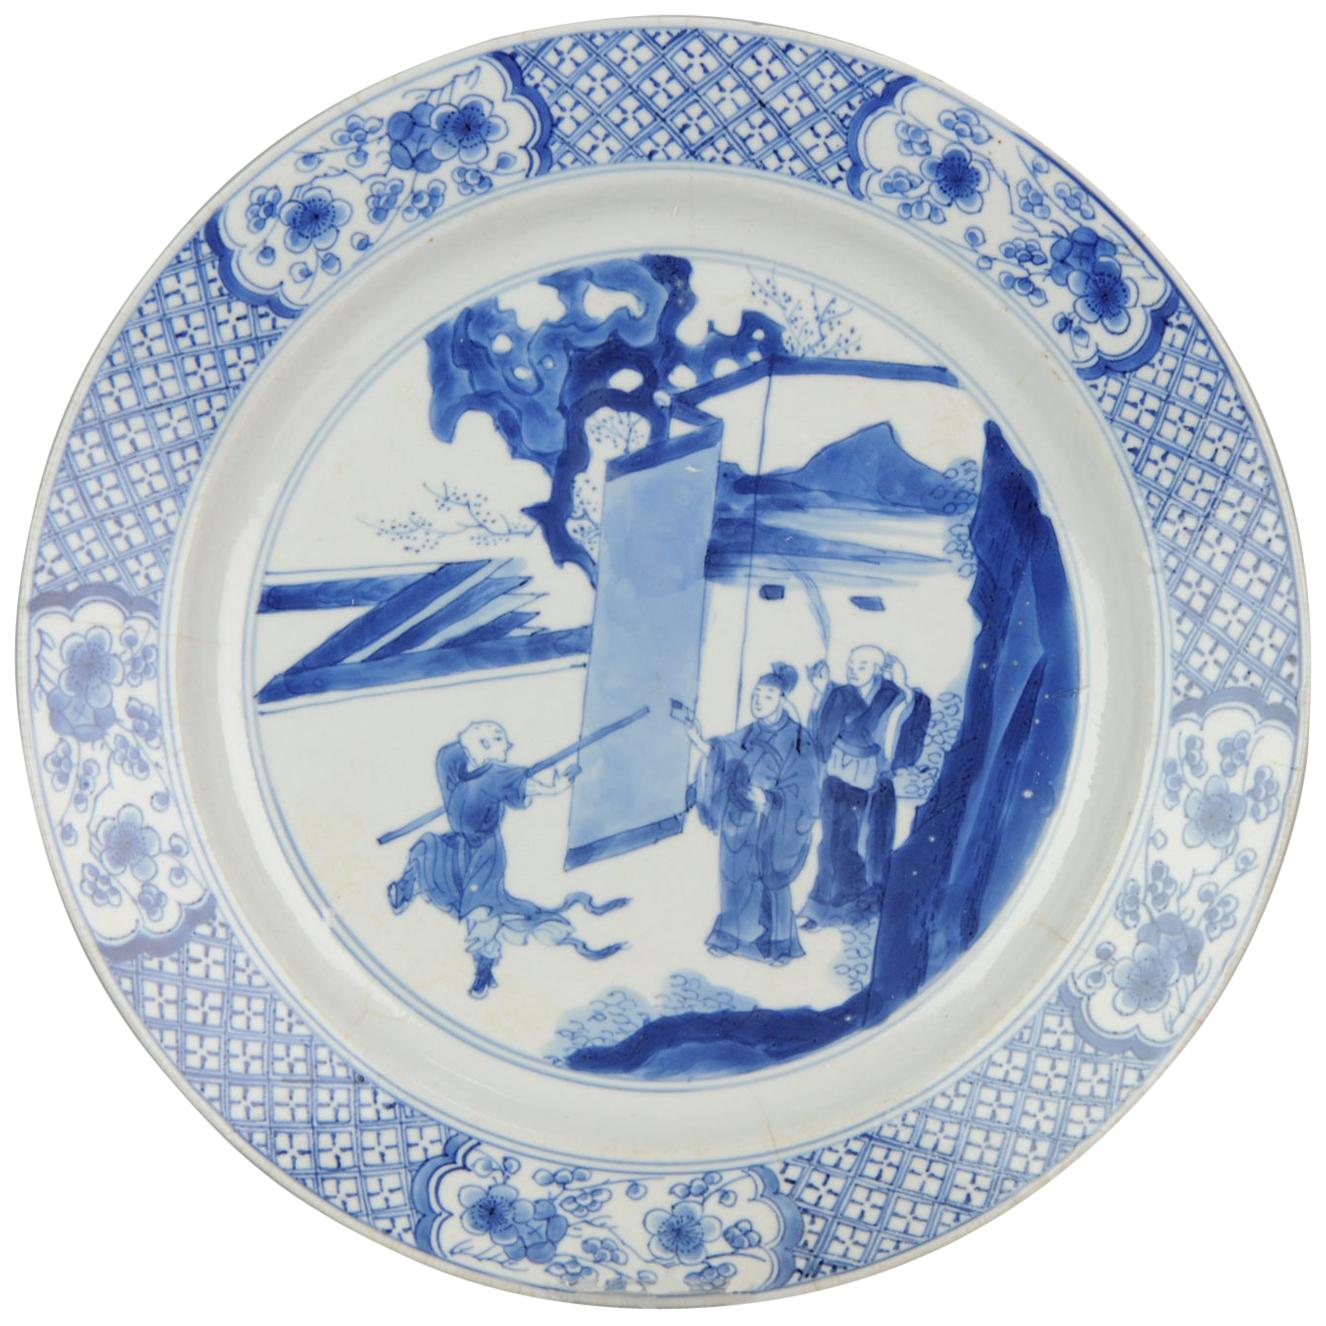 Antique Kangxi Chinese Porcelain Literati Blue and White Figural Plate Marked